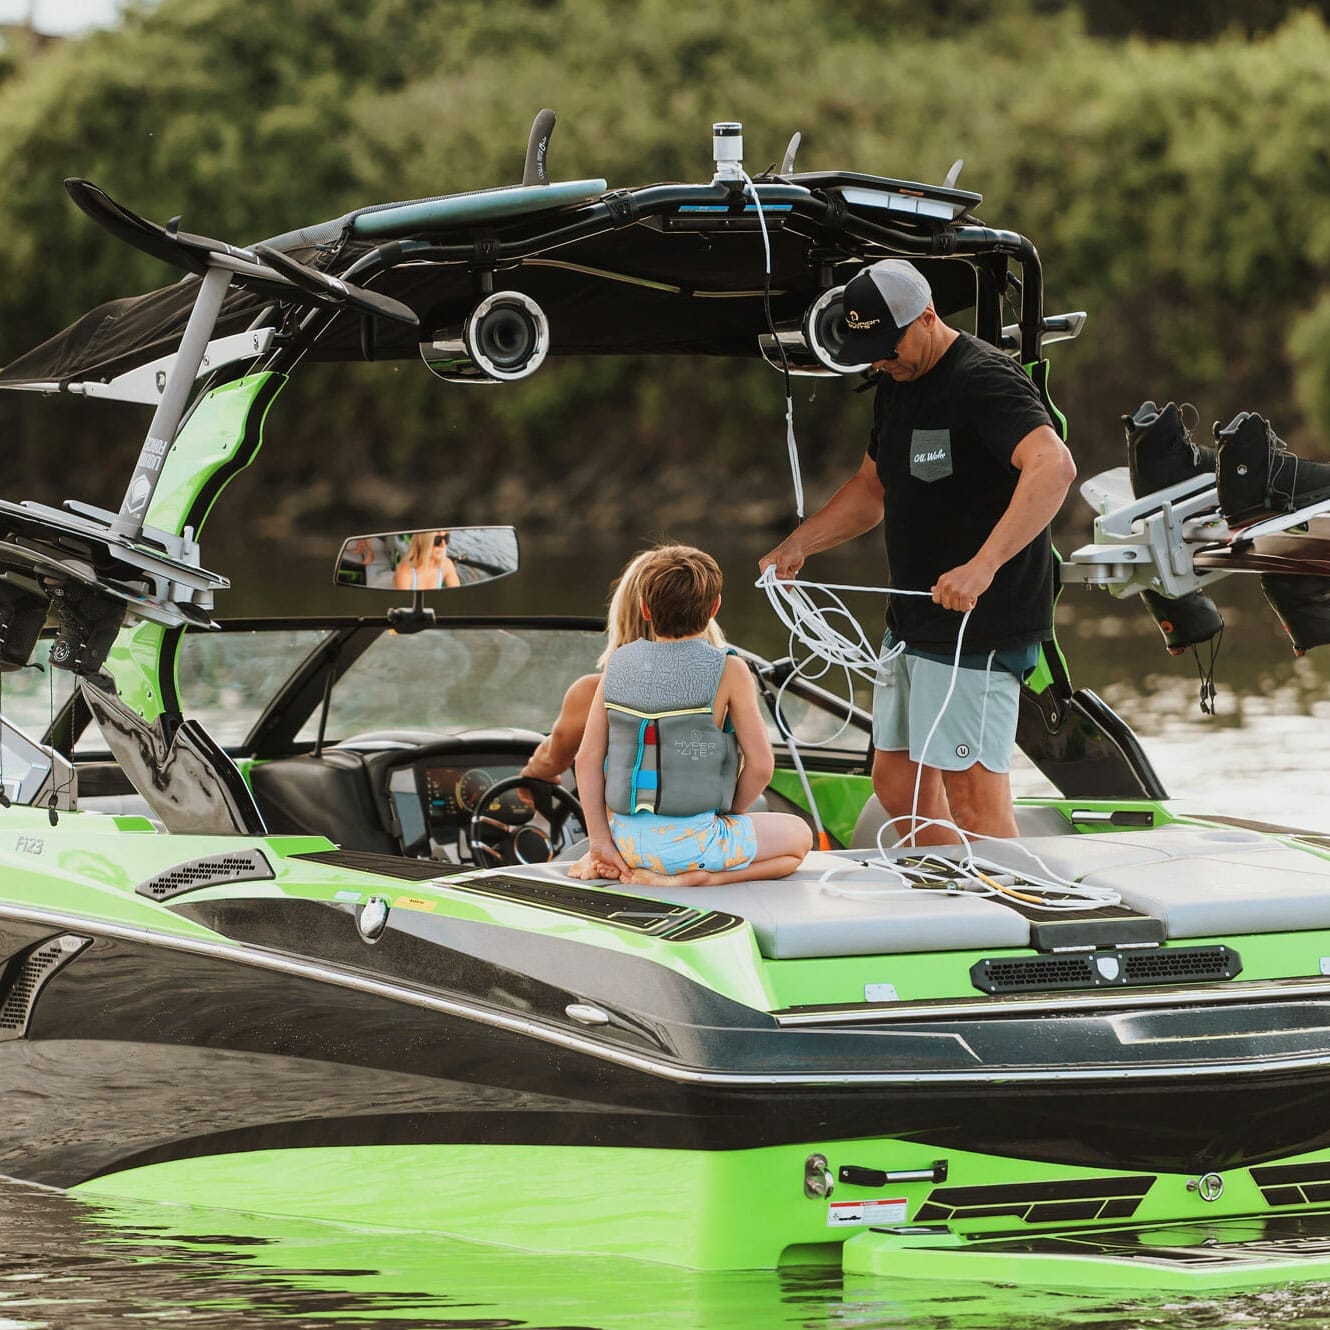 A man and a child on a wakesurf boat.